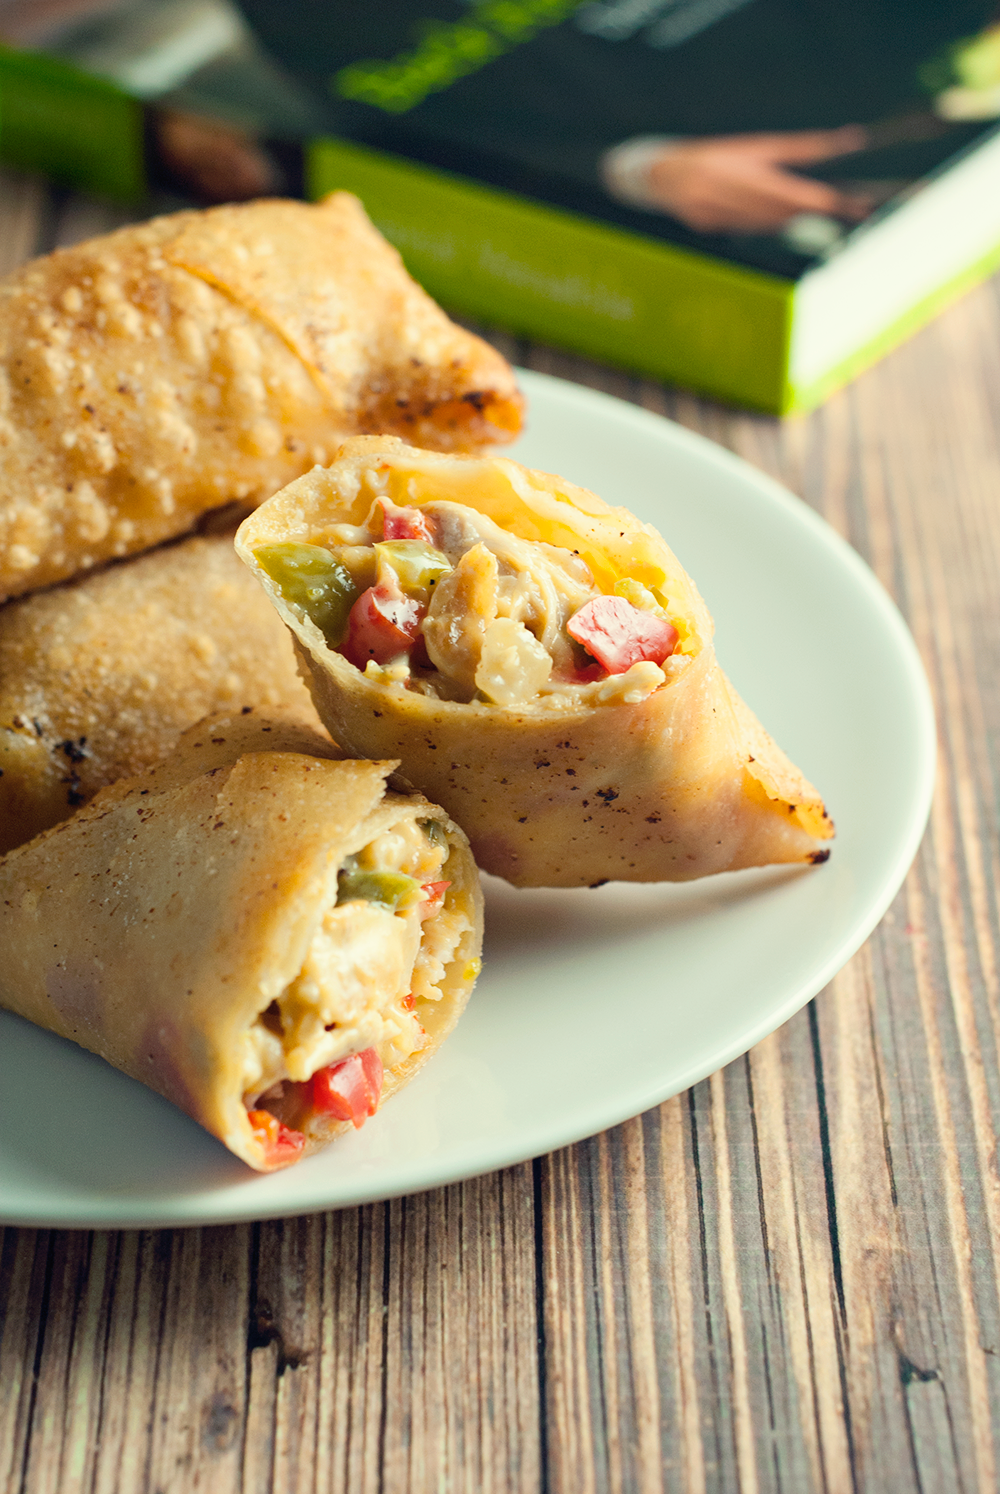 A play on the classic Philly Cheesesteak, these Chicken Cheesesteak Egg Rolls are simple to make, delicious, and ready in 30 minutes!